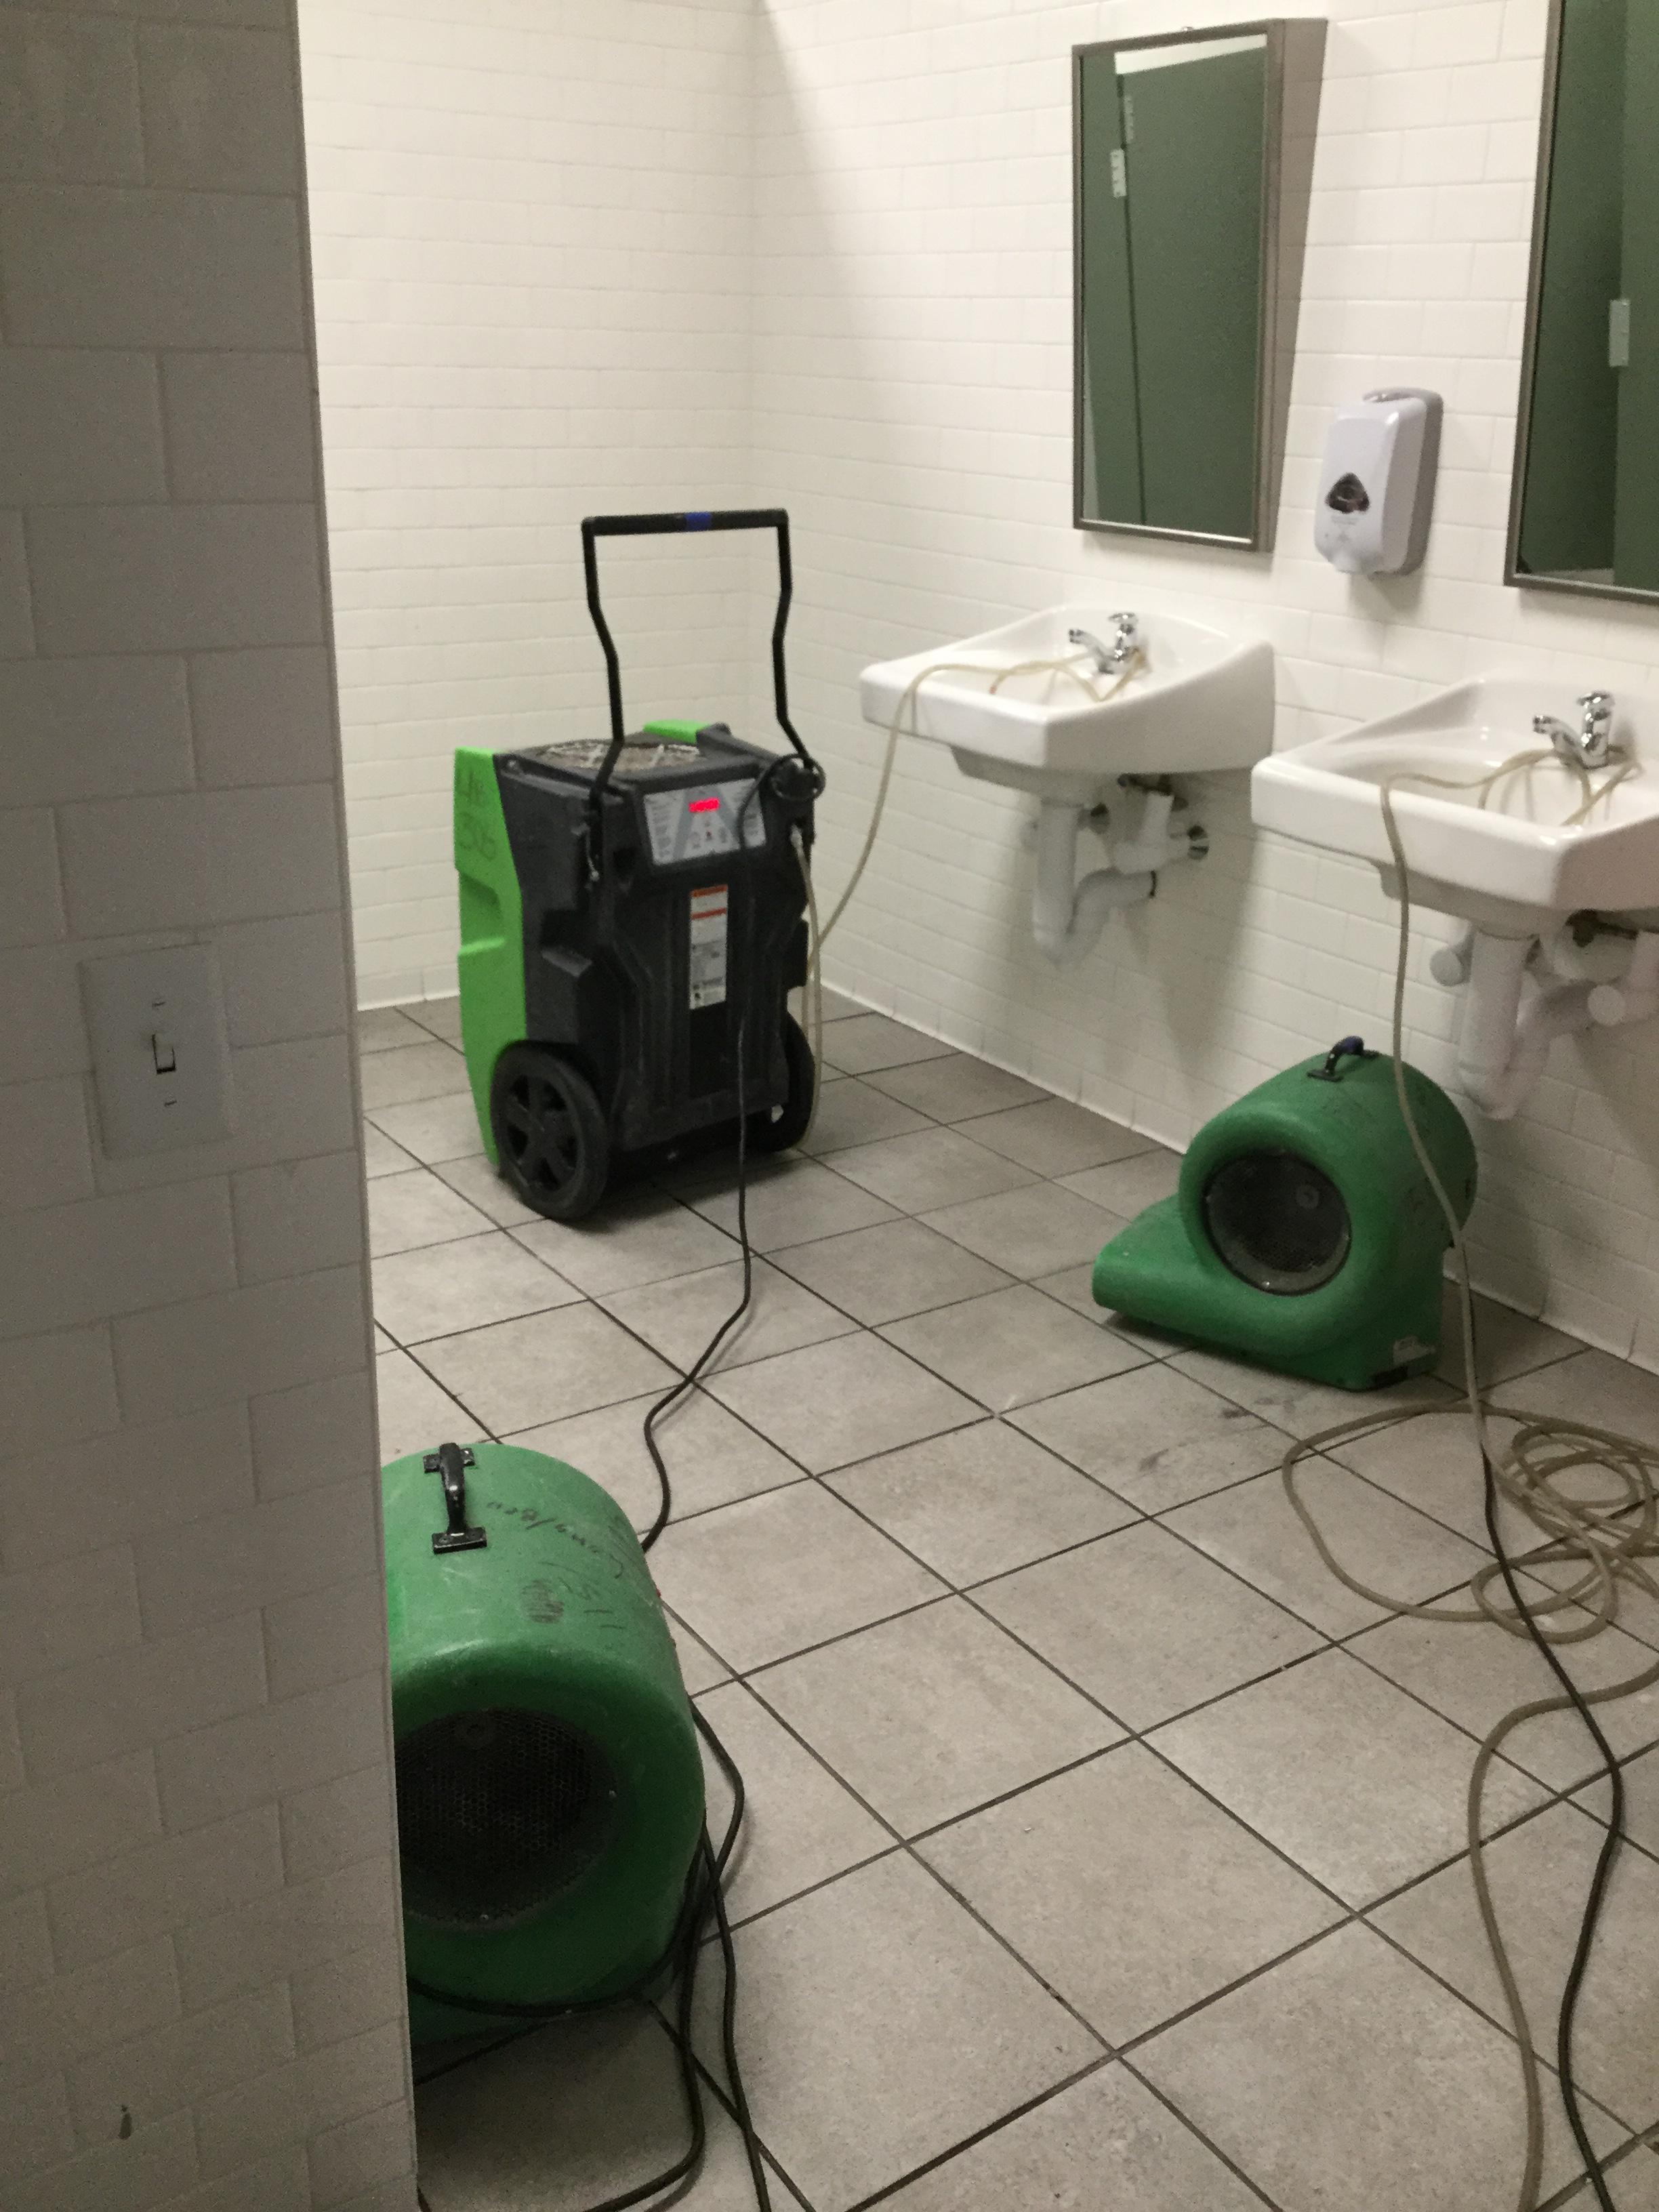 SERVPRO of Langhorne/Bensalem has the professional staff ready to tackle any of your water cleanup and restoration needs!